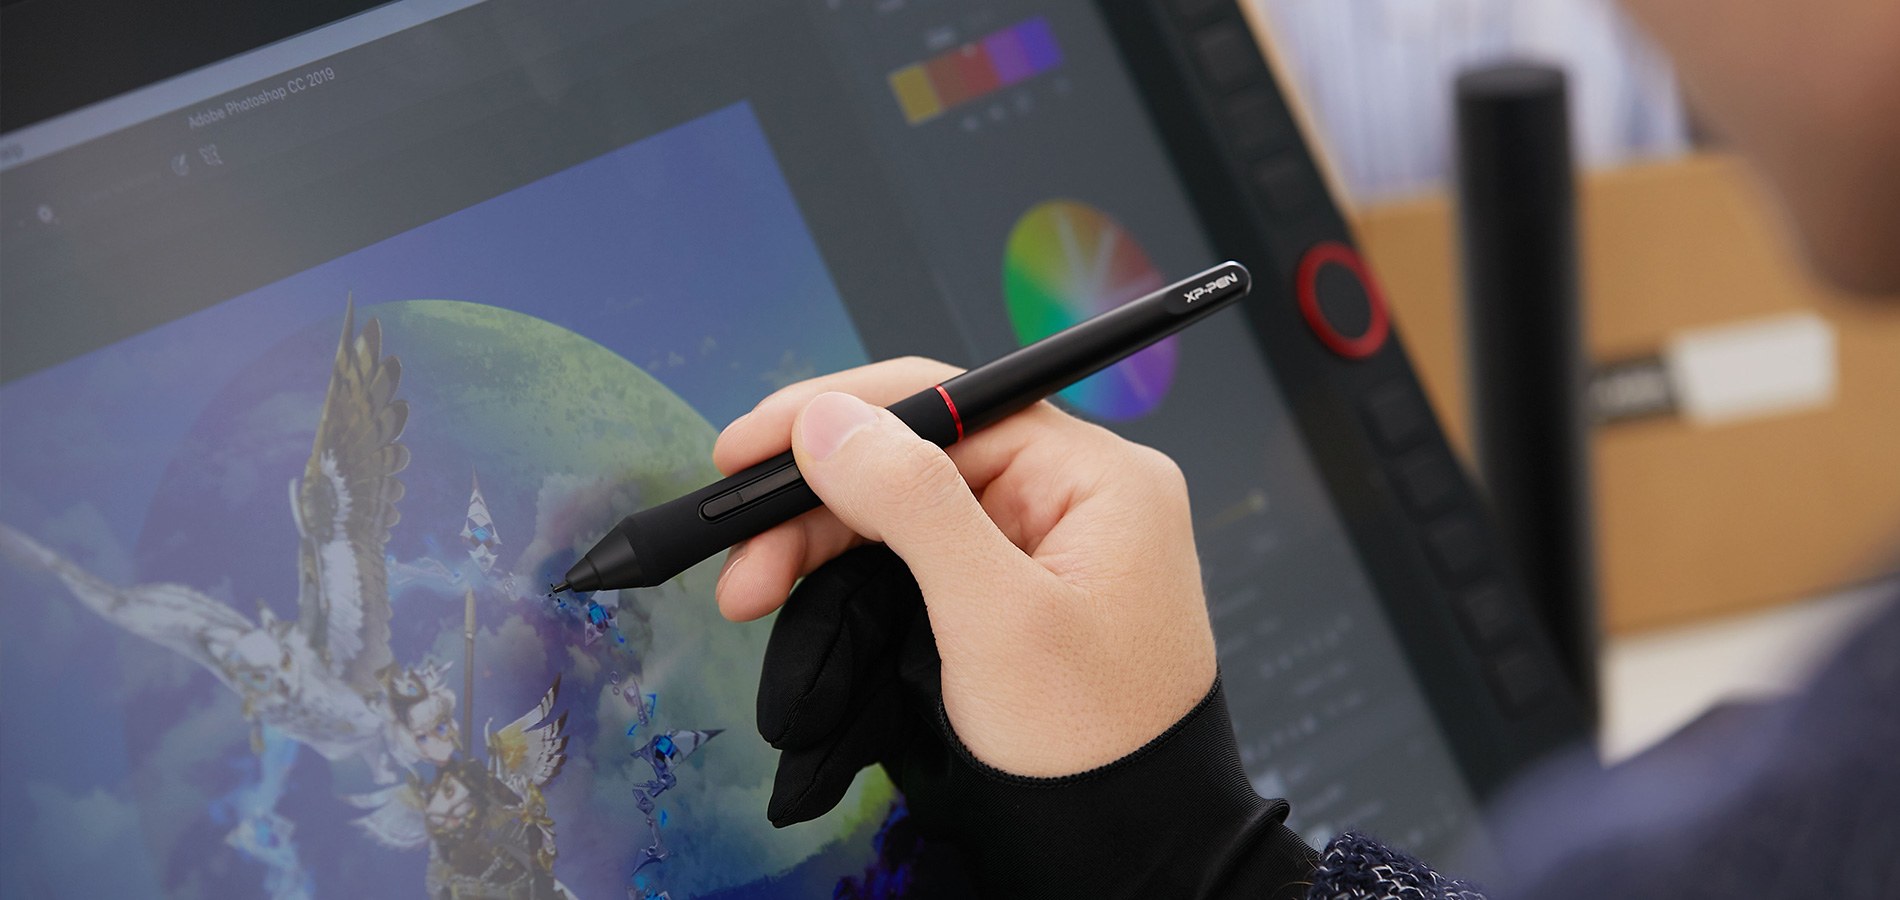 digital writing , drawing and painting on XPPen Artist 22R Pro Graphic Pen Display